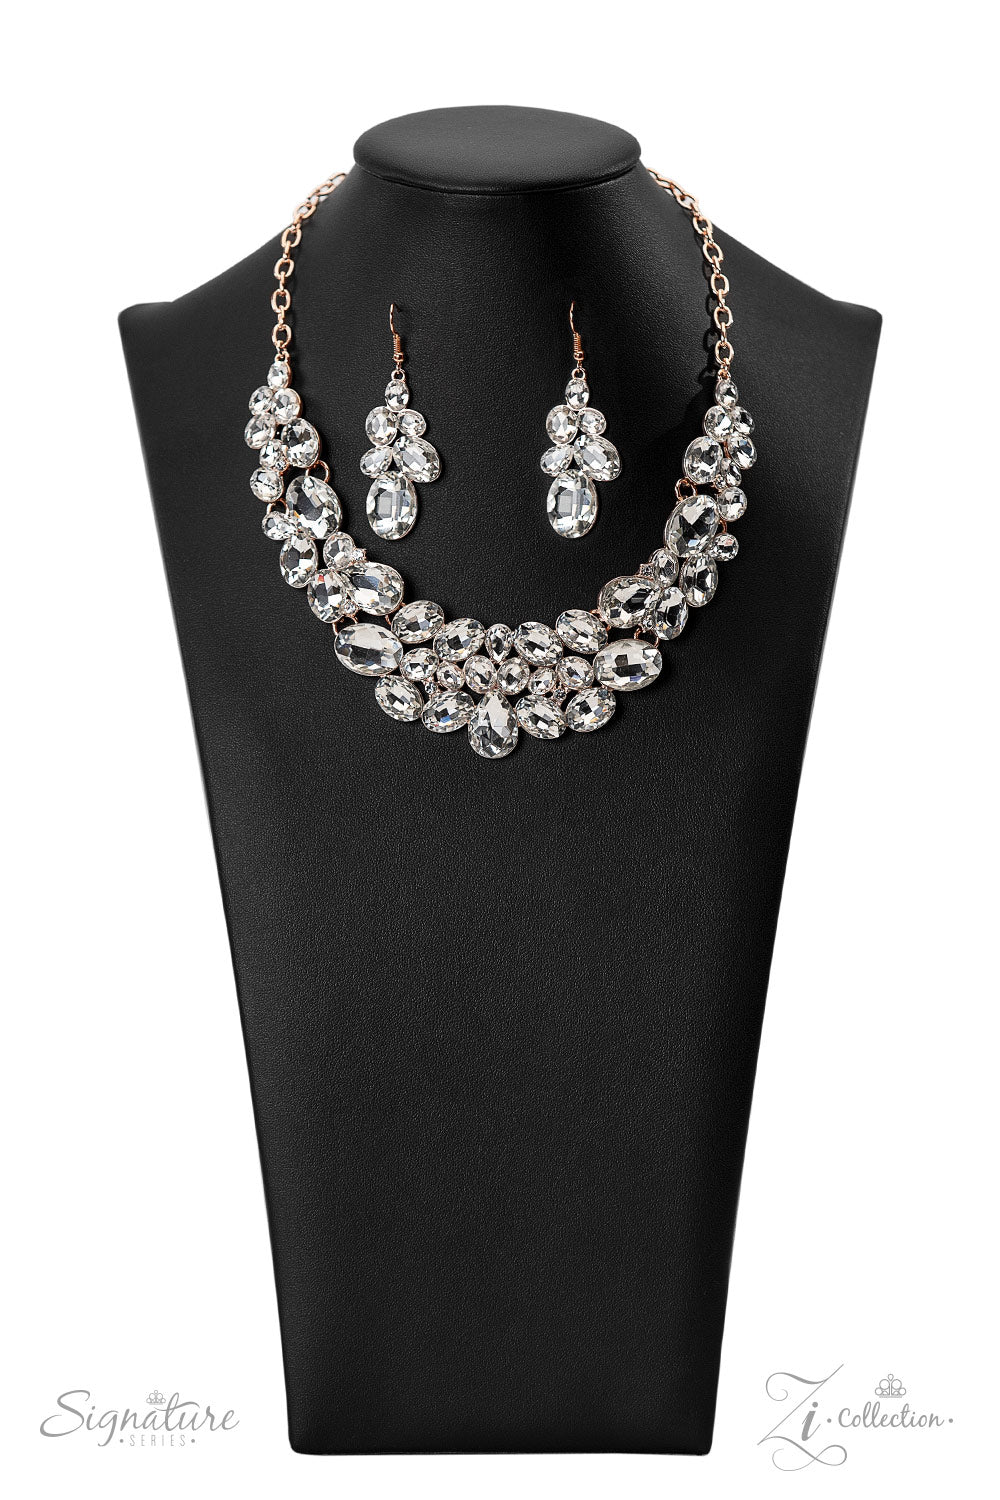 Oversized white rhinestones with exaggerated faceted surfaces gather into glittery clusters along the collar